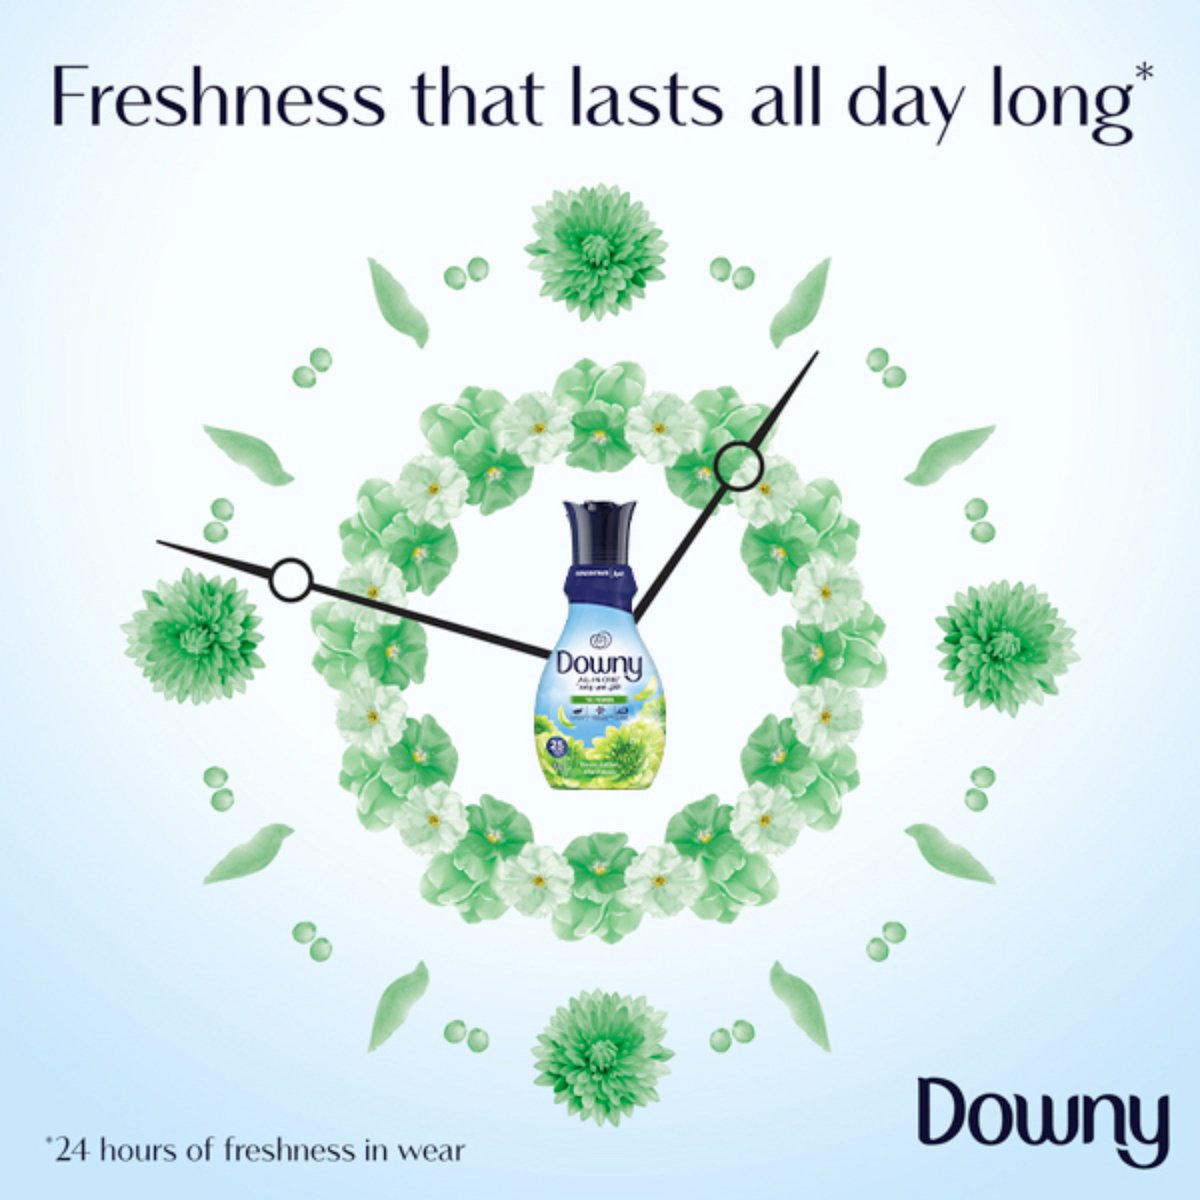 Downy Concentrate All-in-One Dream Garden Fabric Softener 2 Litres